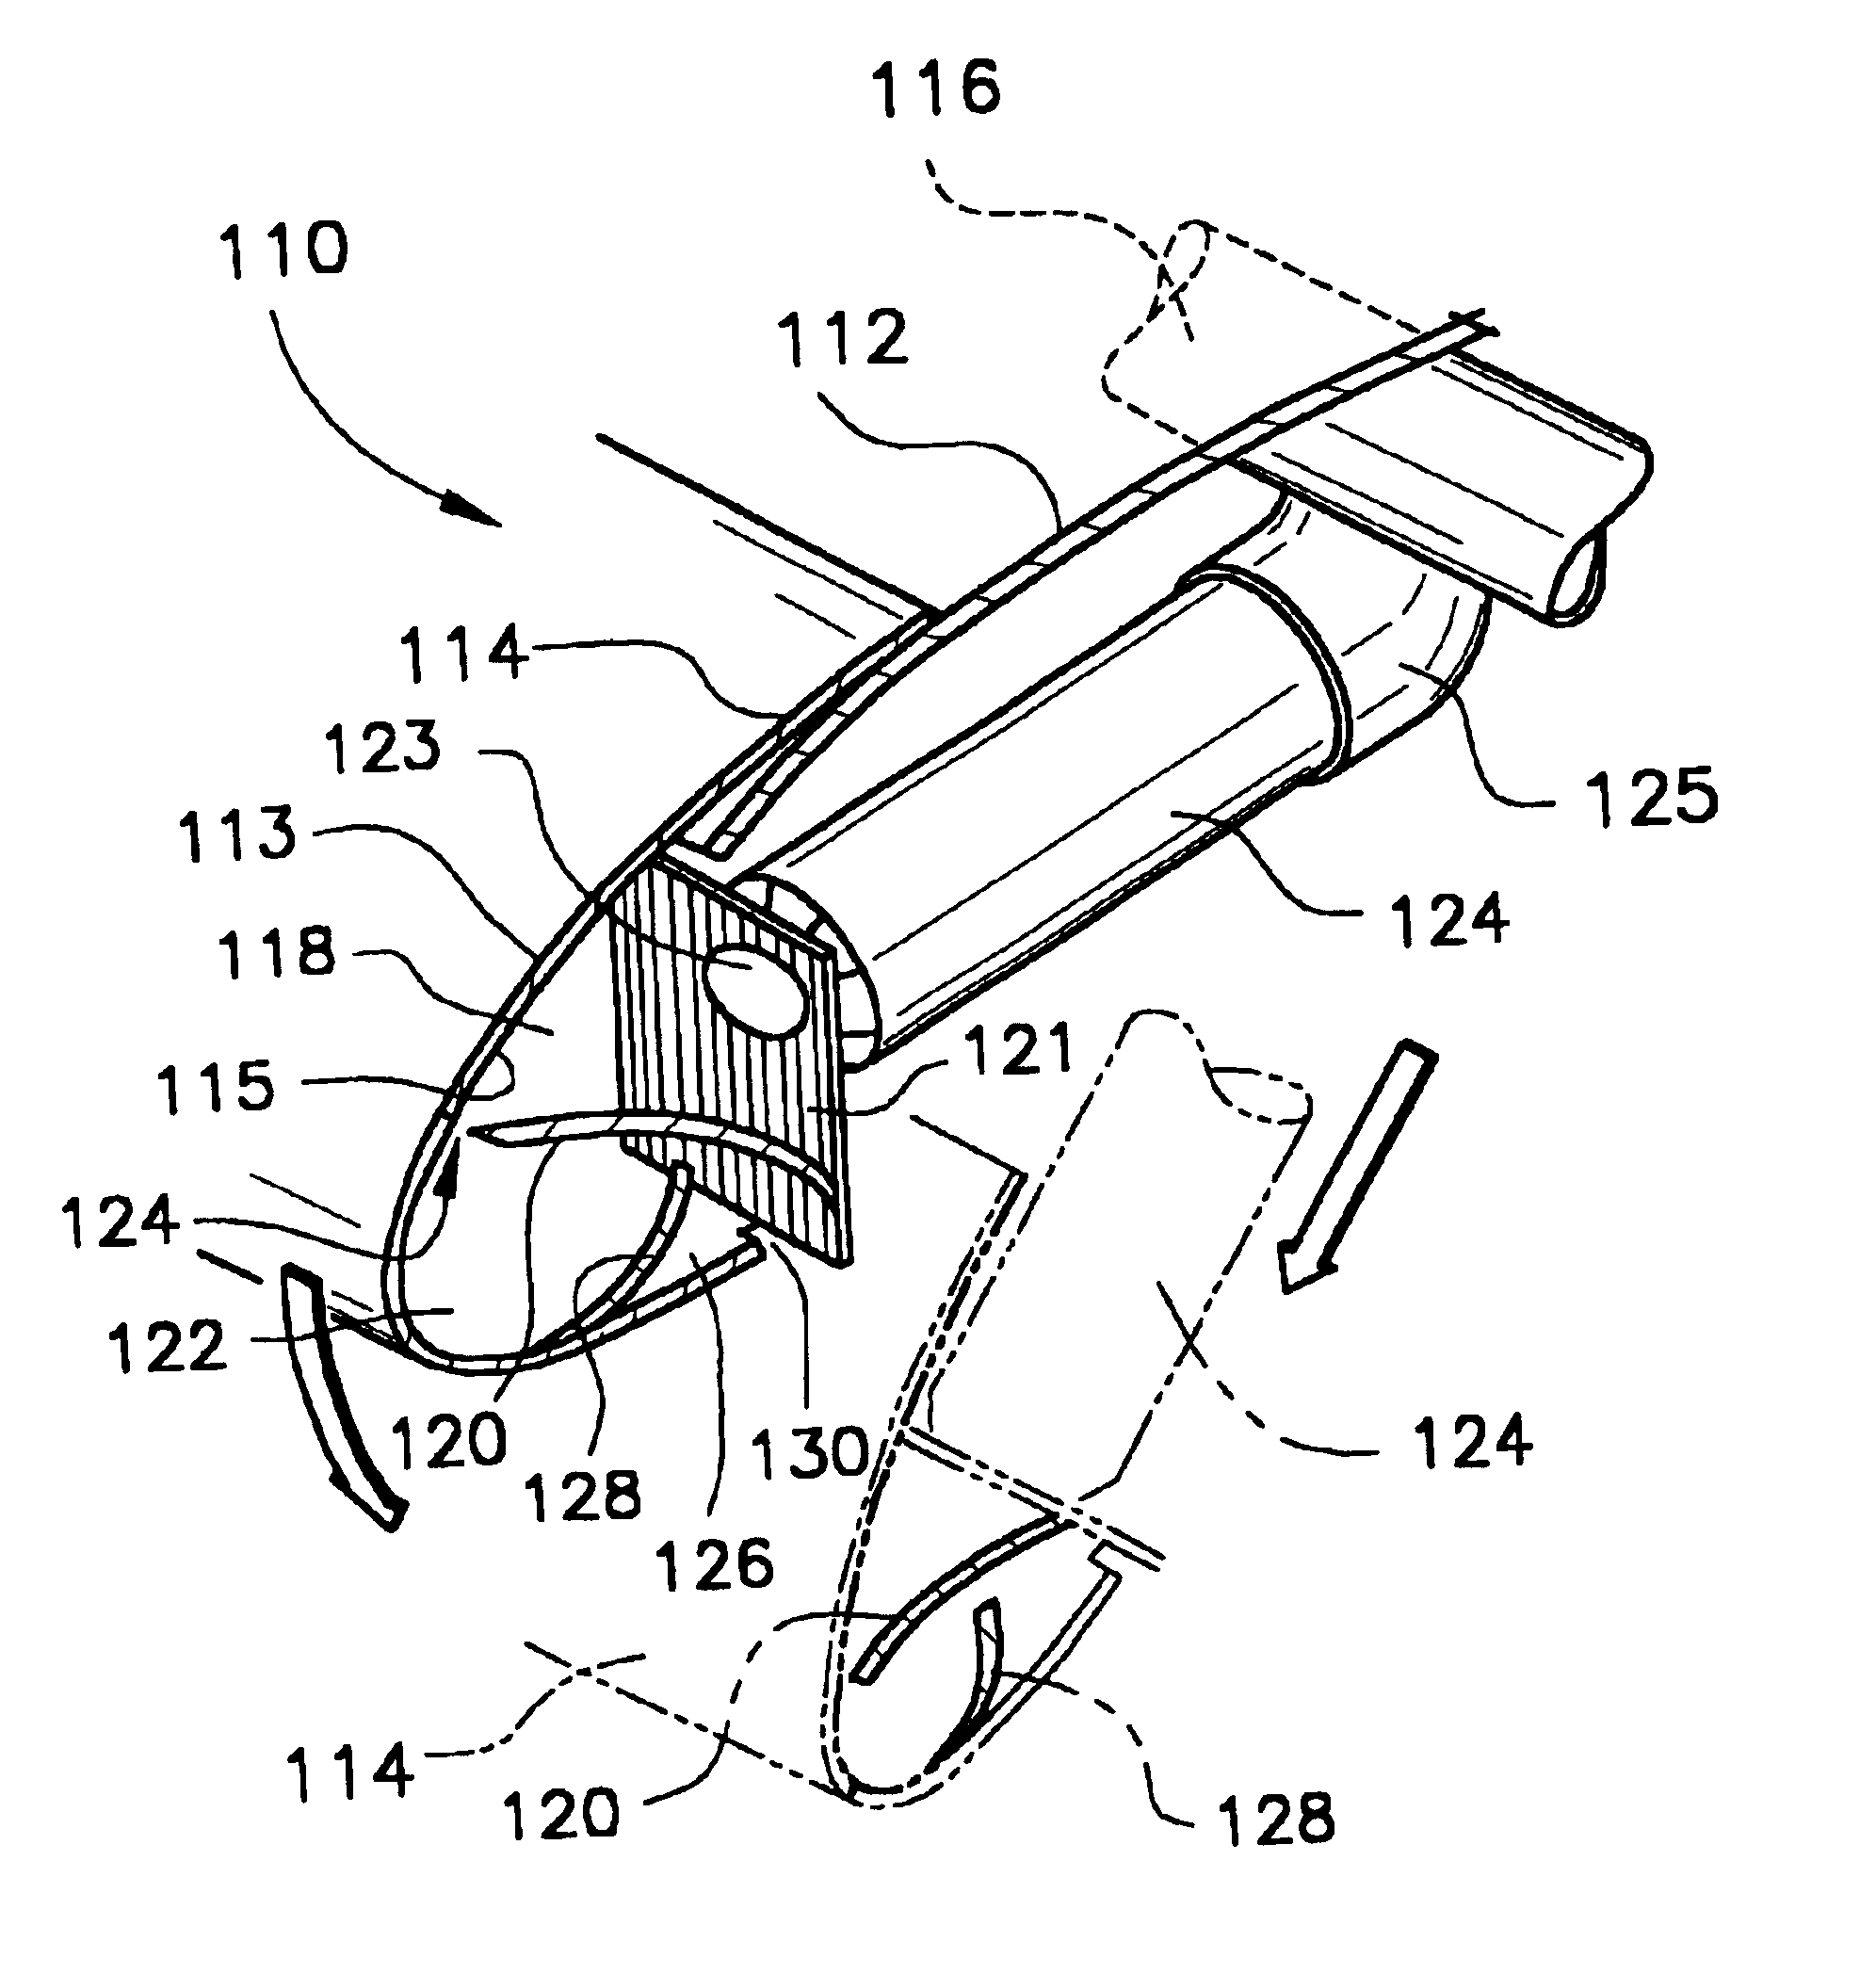 Airfoil anti-icing assembly and method